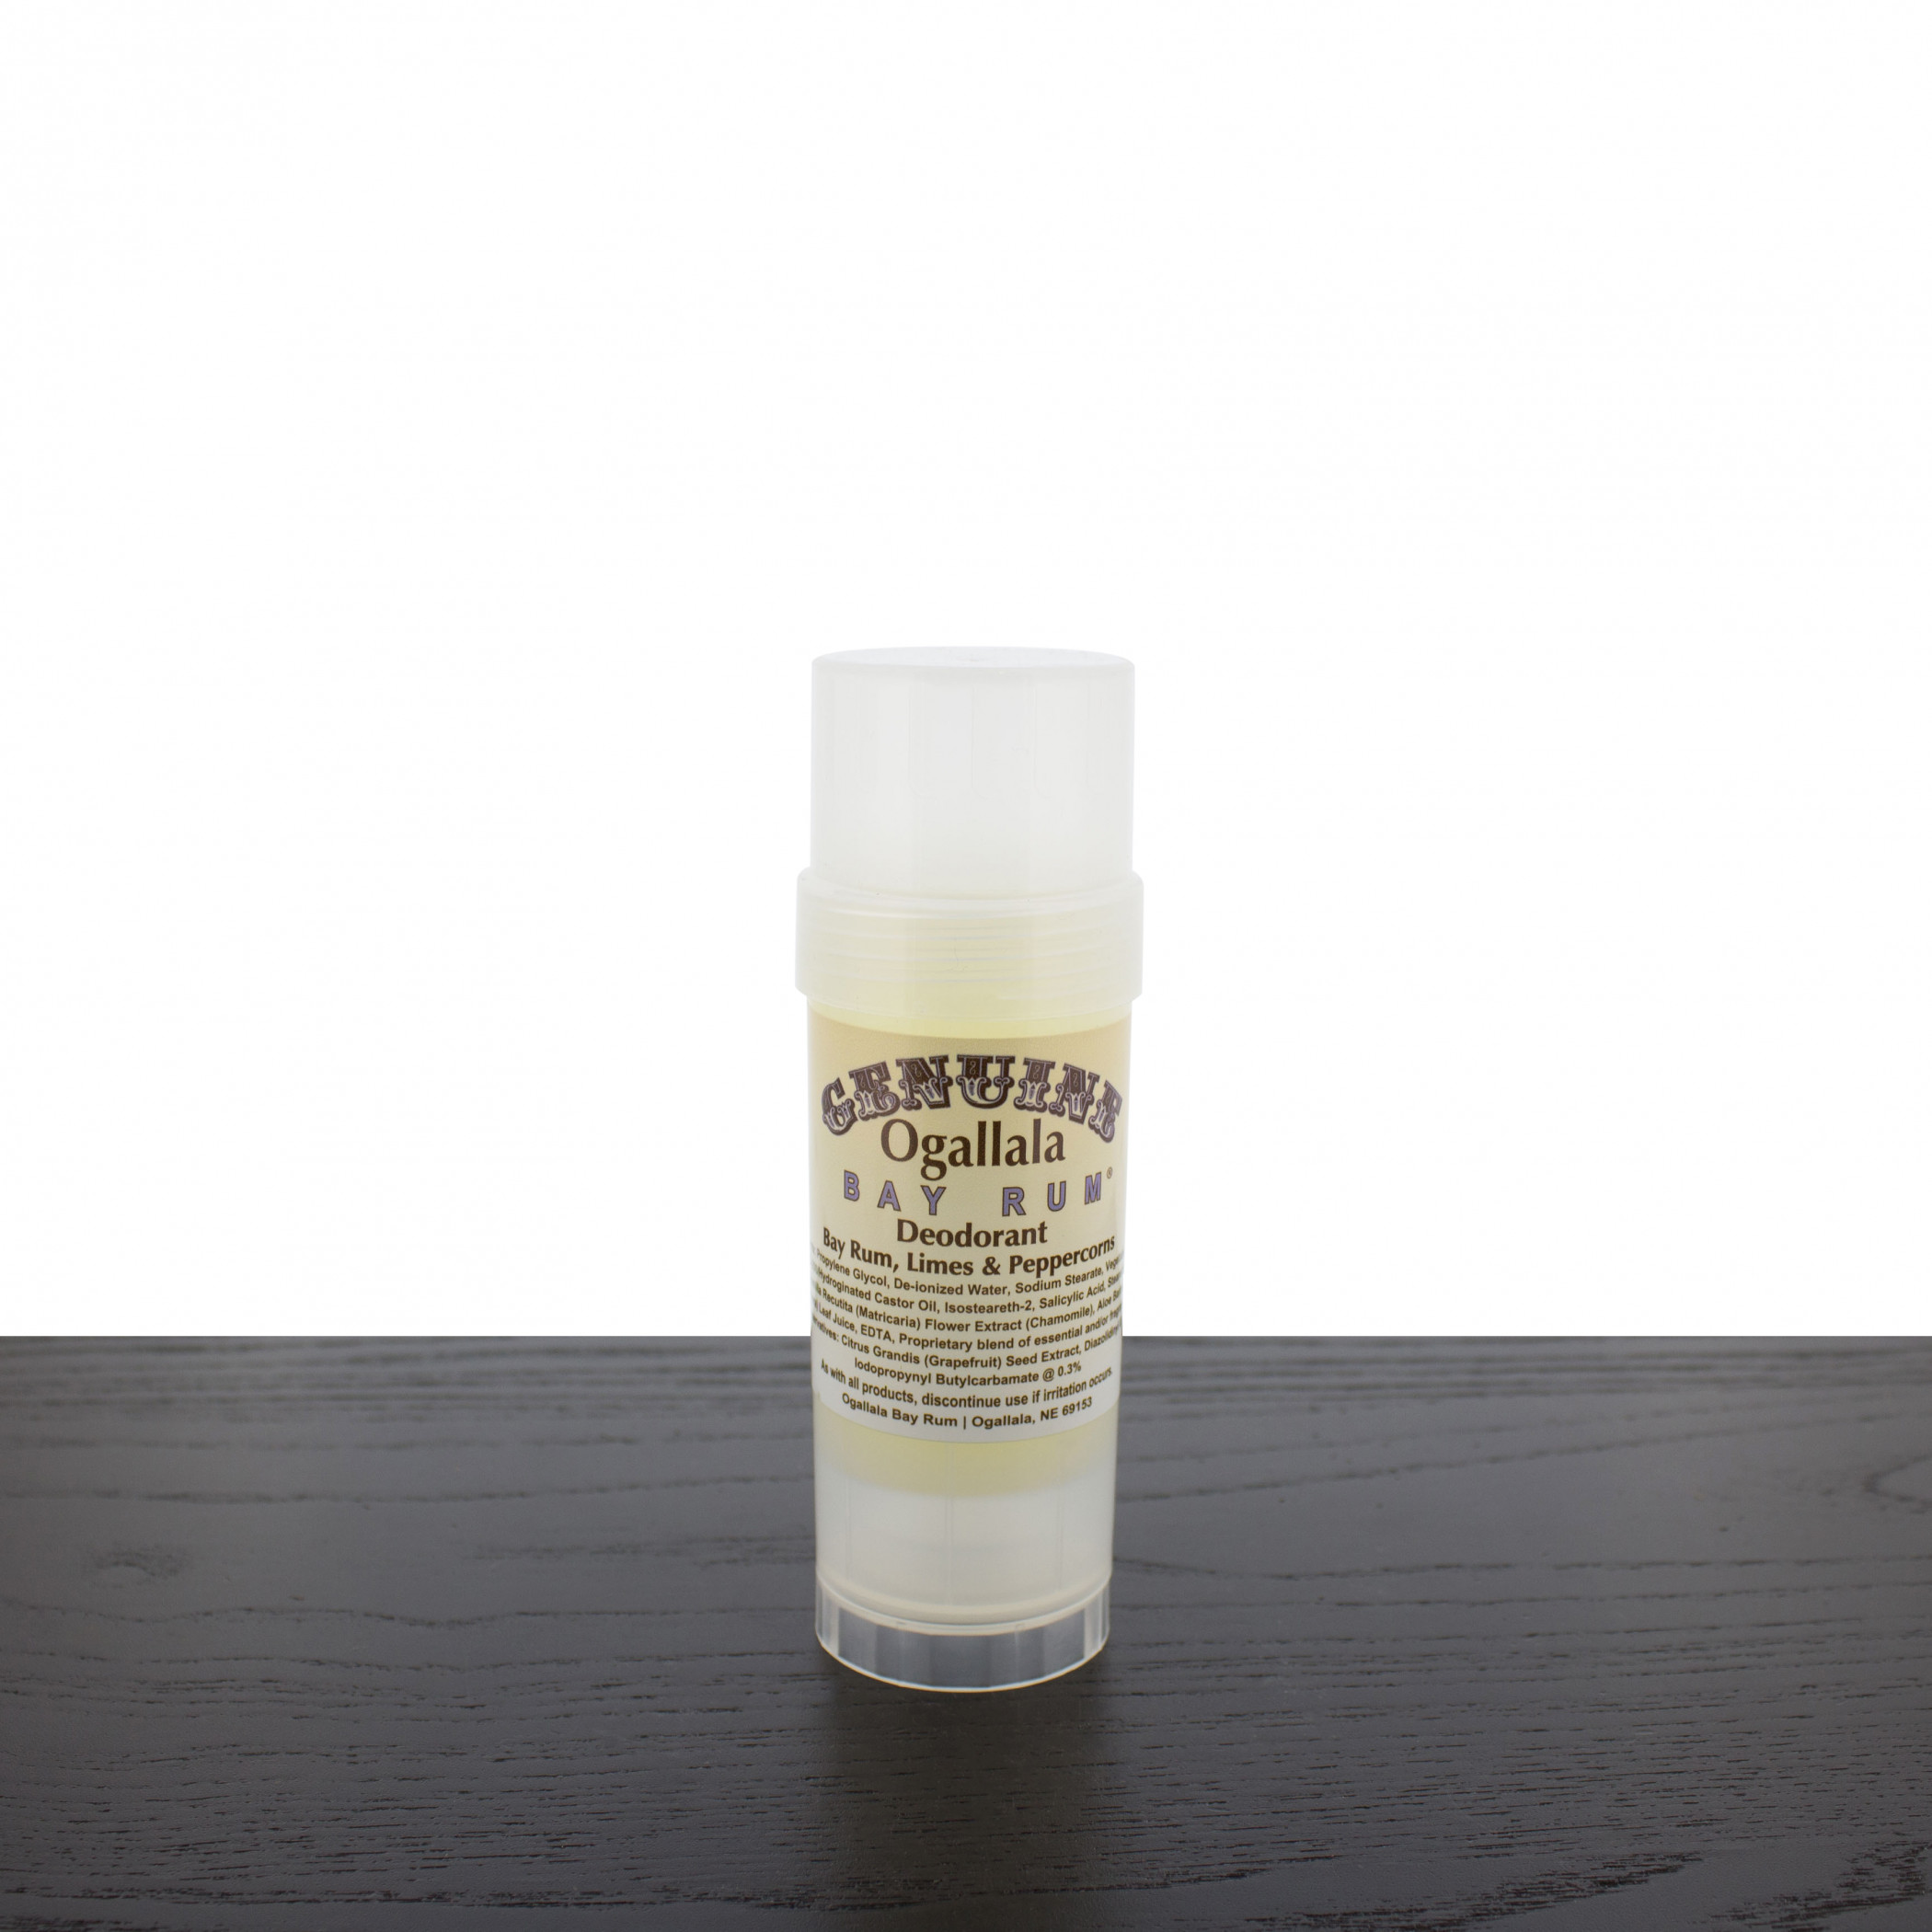 Product image 0 for Ogallala Bay Rum, Limes & Peppercorns Rum Stick Deodorant, 2.5 oz